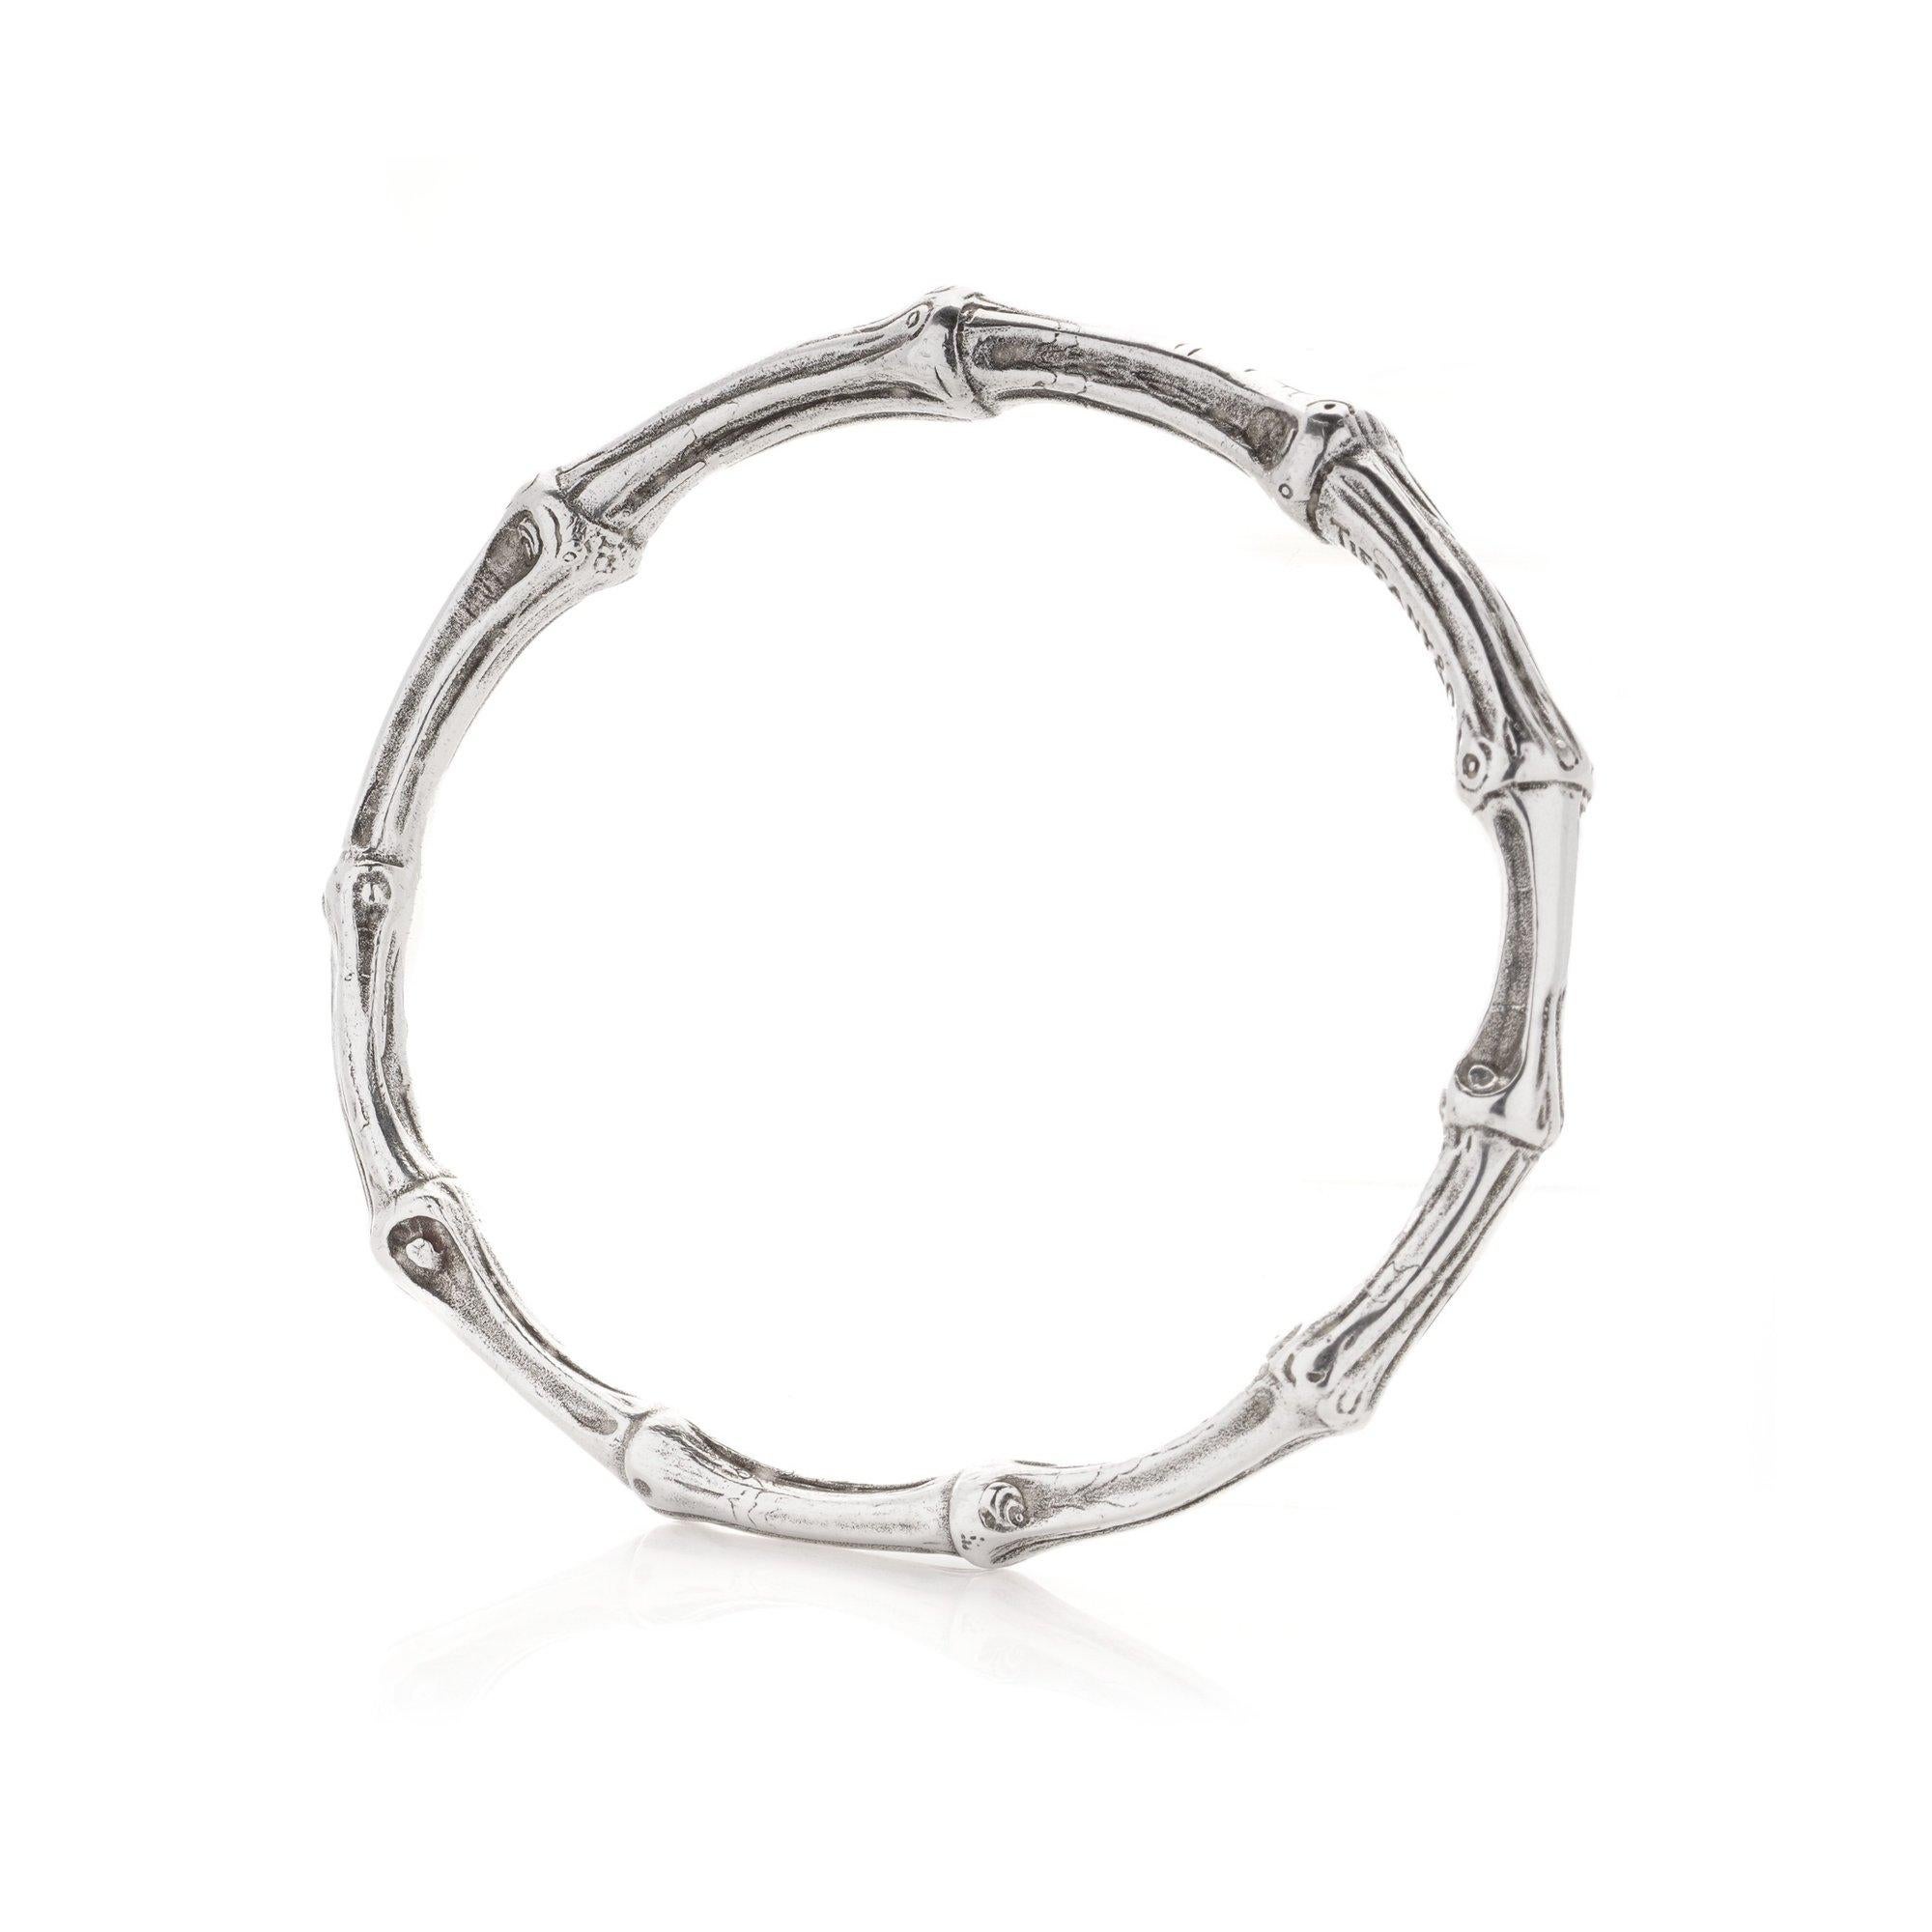 Women's Tiffany & Co. sterling silver bangle in the shape of bamboo